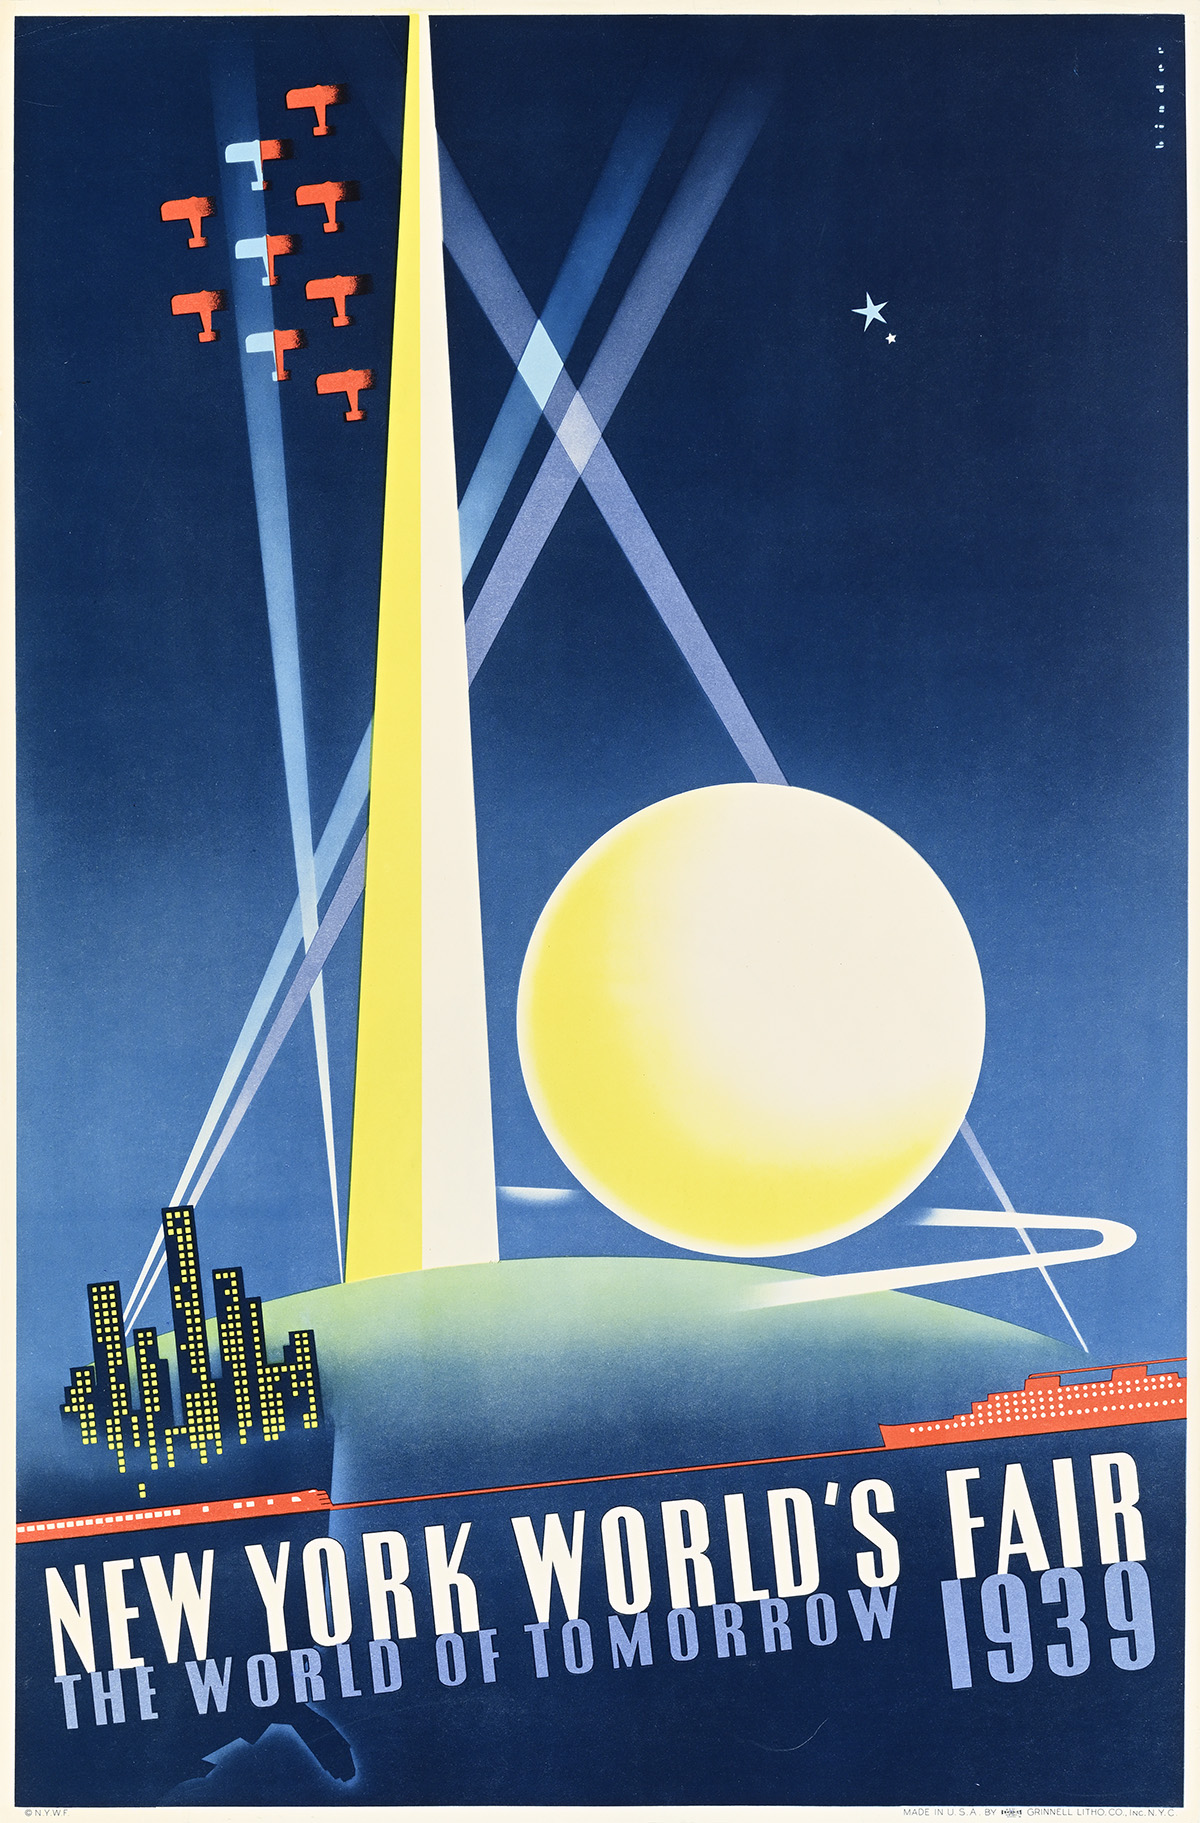 A poster of the Trylon and Perisphere against a night sky, a small train and ship in the foreground.